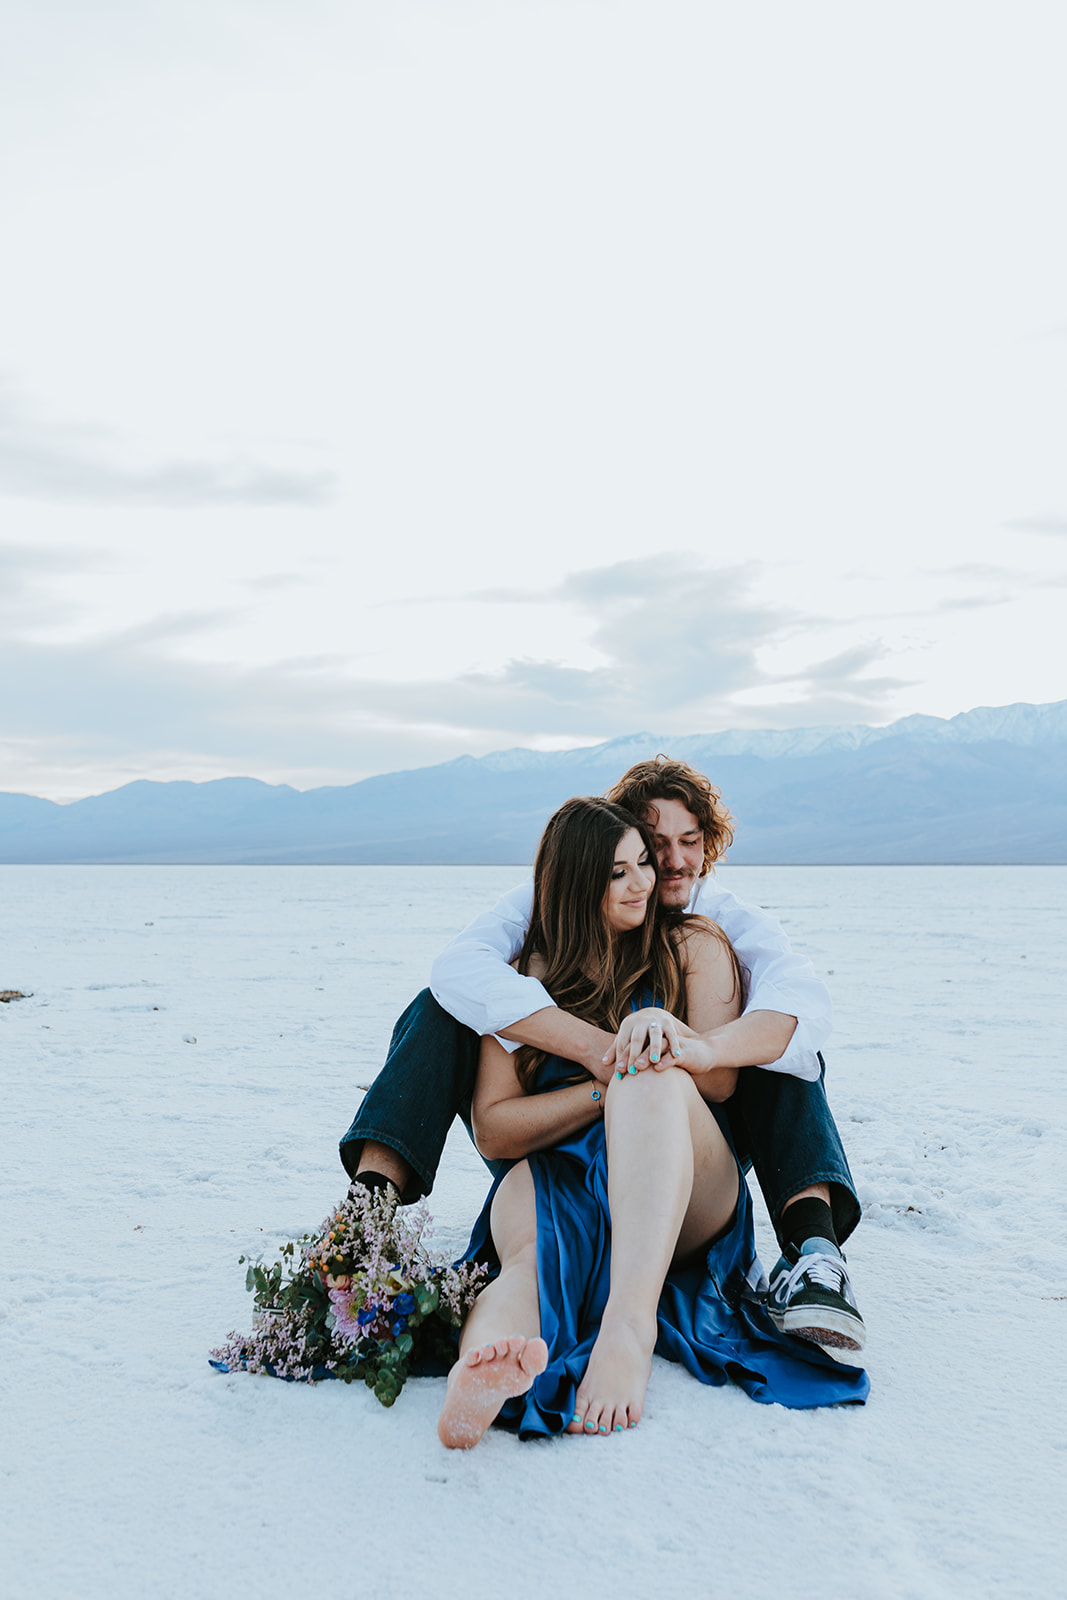 Engagement photos at Badwater Basin, Death Valley National Park